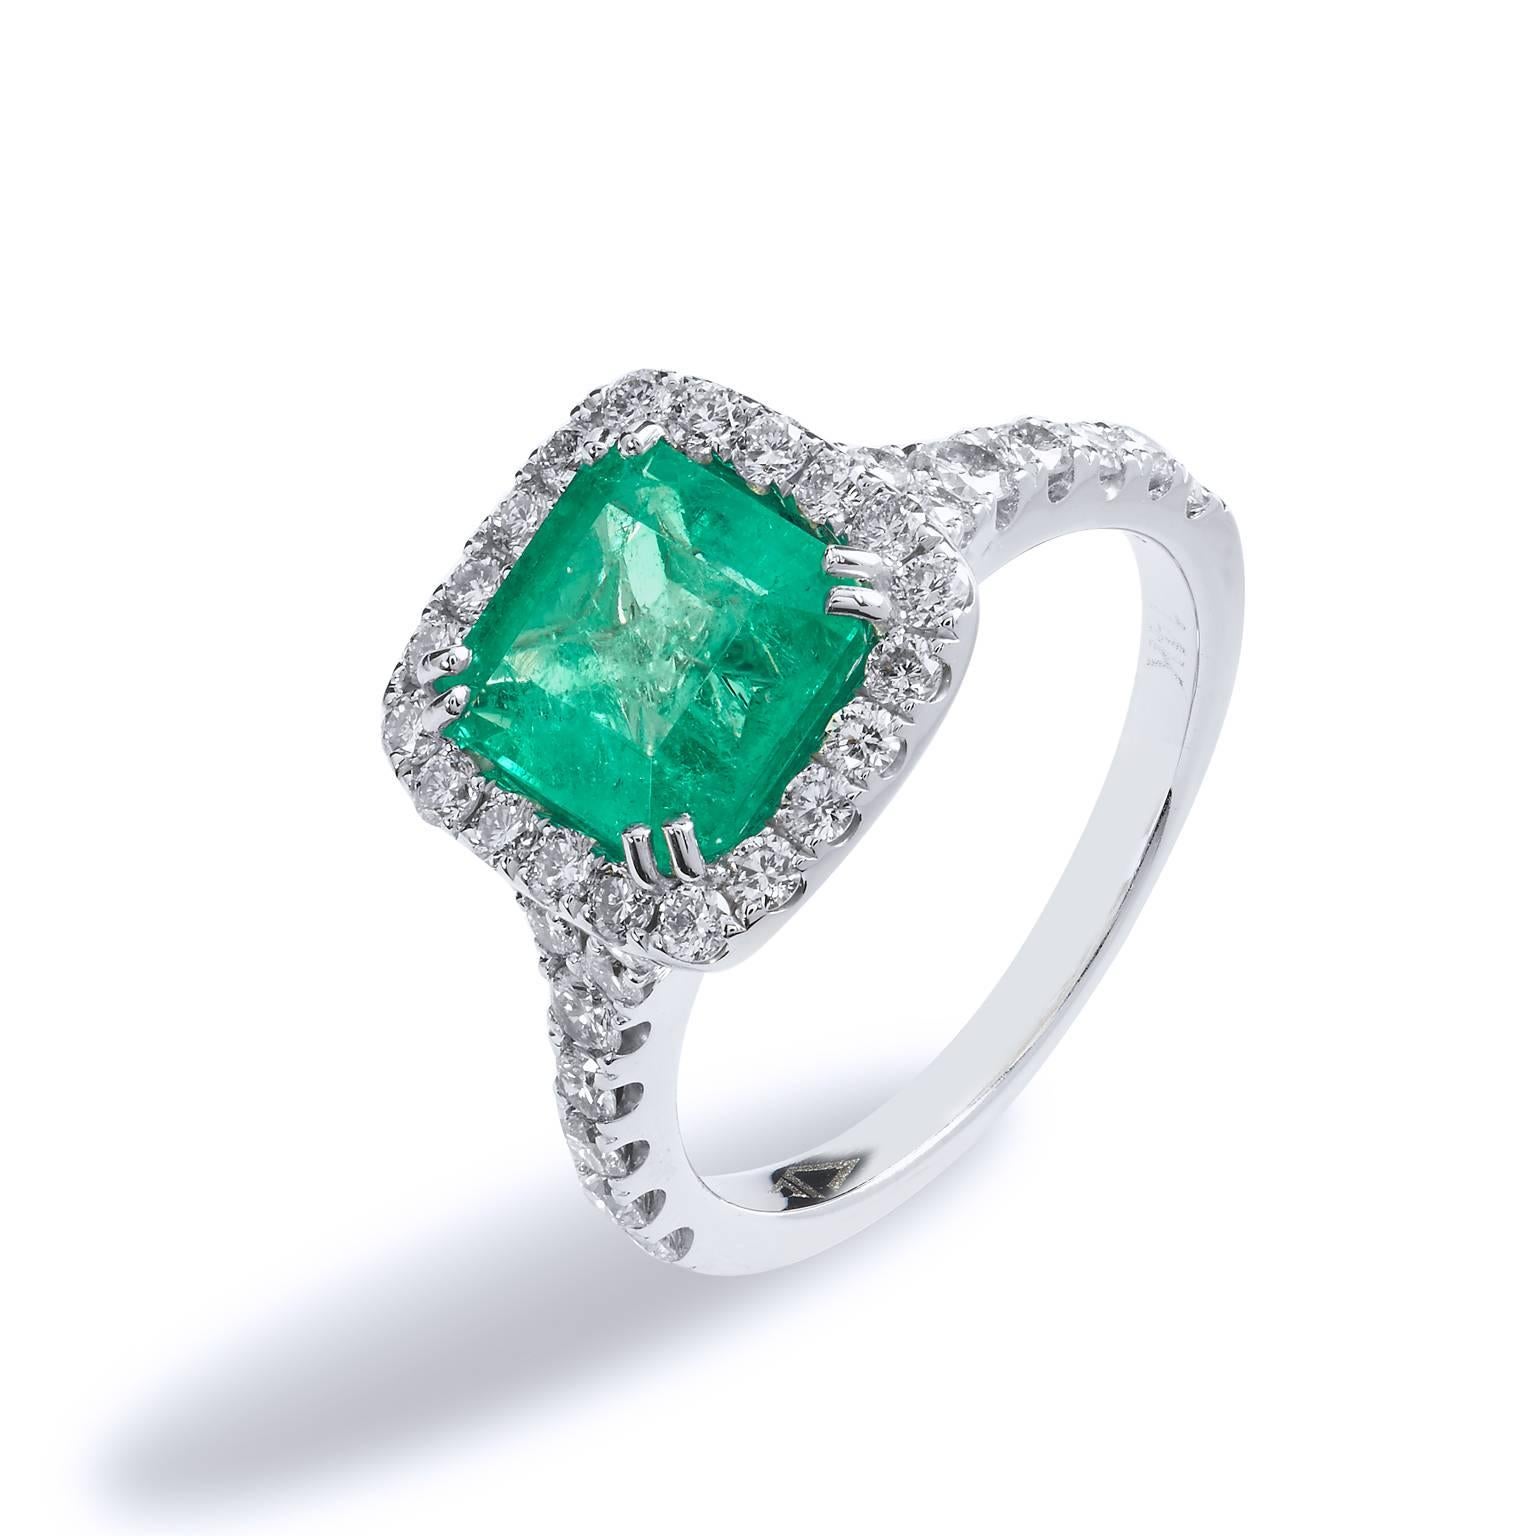 With the gifting season approaching, this magnificent and timeless piece will seduce more than a smile when opened. Crafted in 14kt white gold, the ring features a 1.92 carat Colombian Emerald. The lively colored gemstone is accessorized by